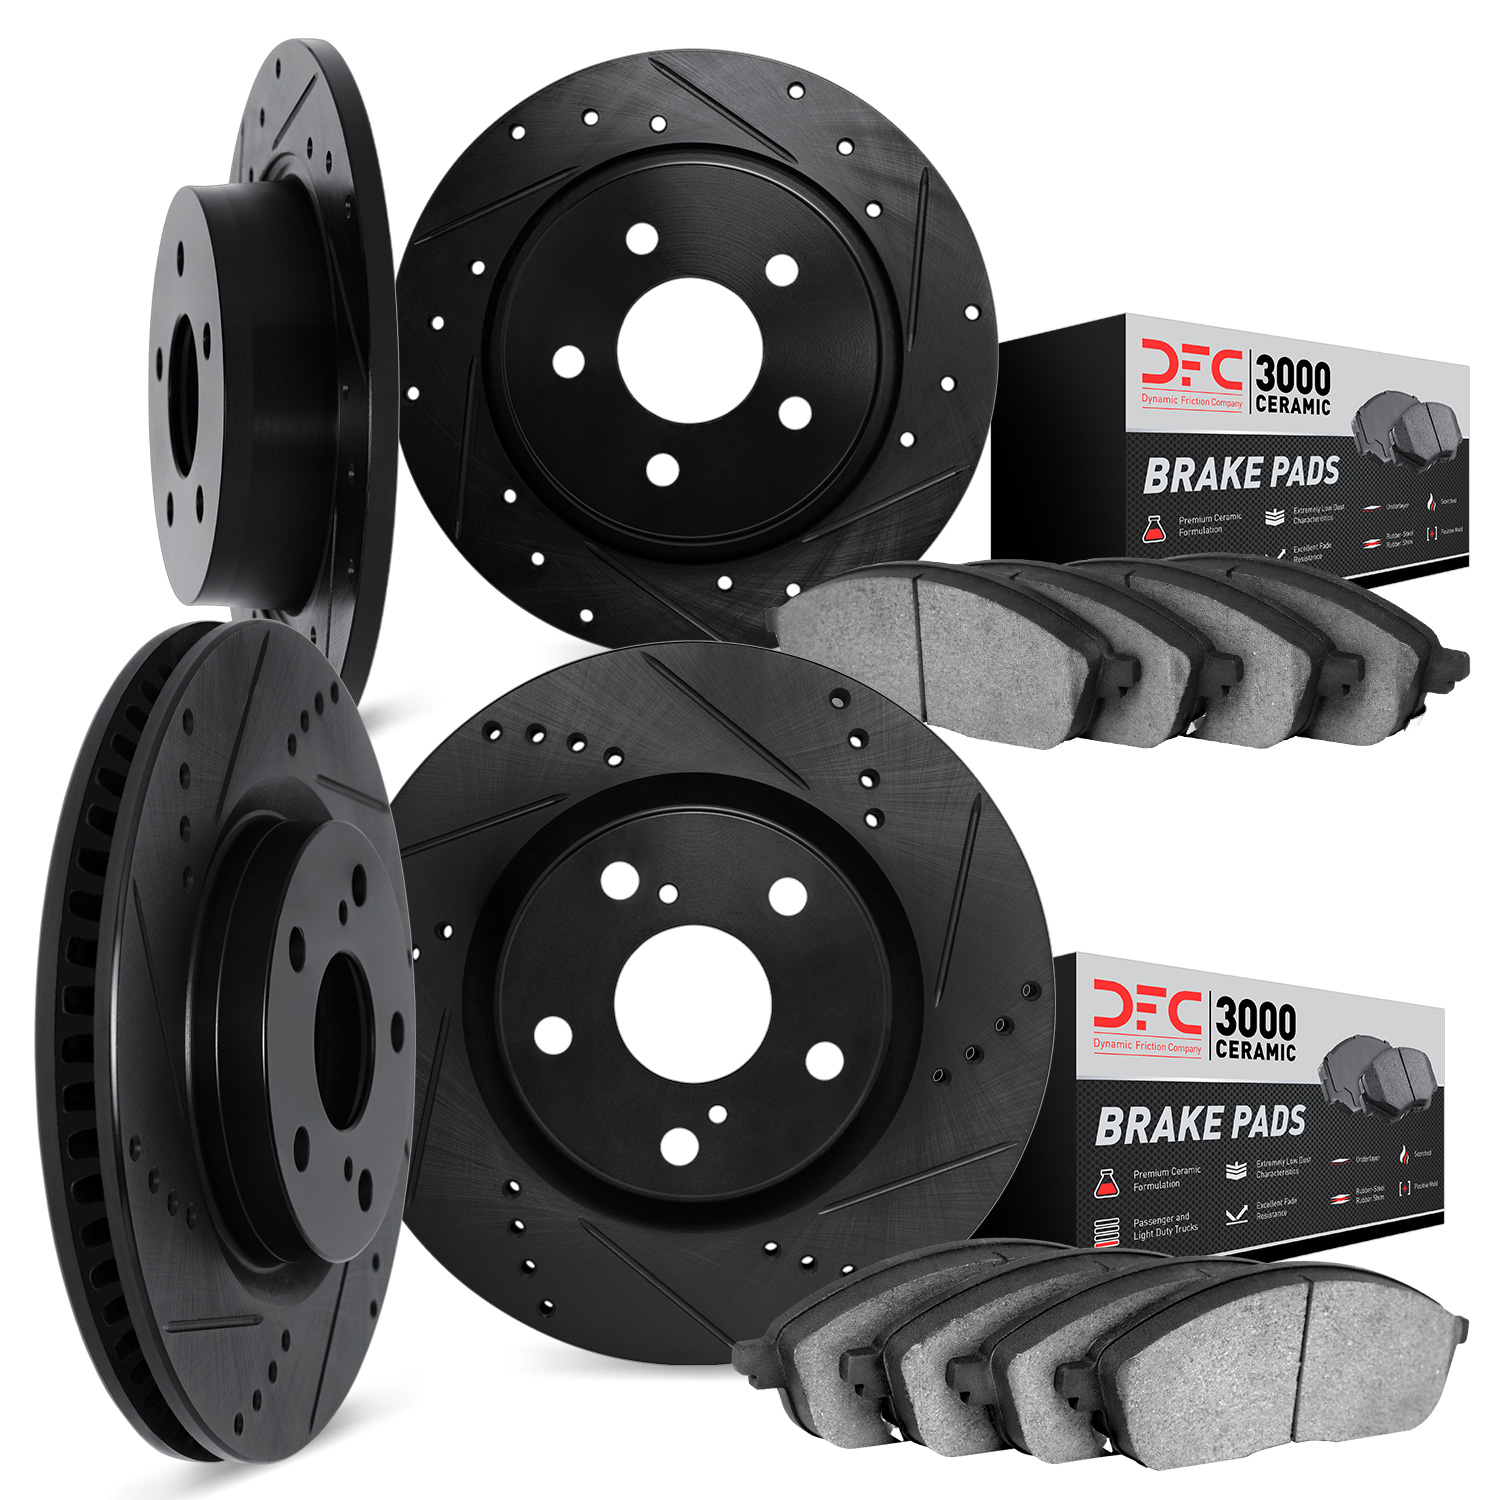 8304-59087 Drilled/Slotted Brake Rotors with 3000-Series Ceramic Brake Pads Kit [Black], Fits Select Acura/Honda, Position: Fron